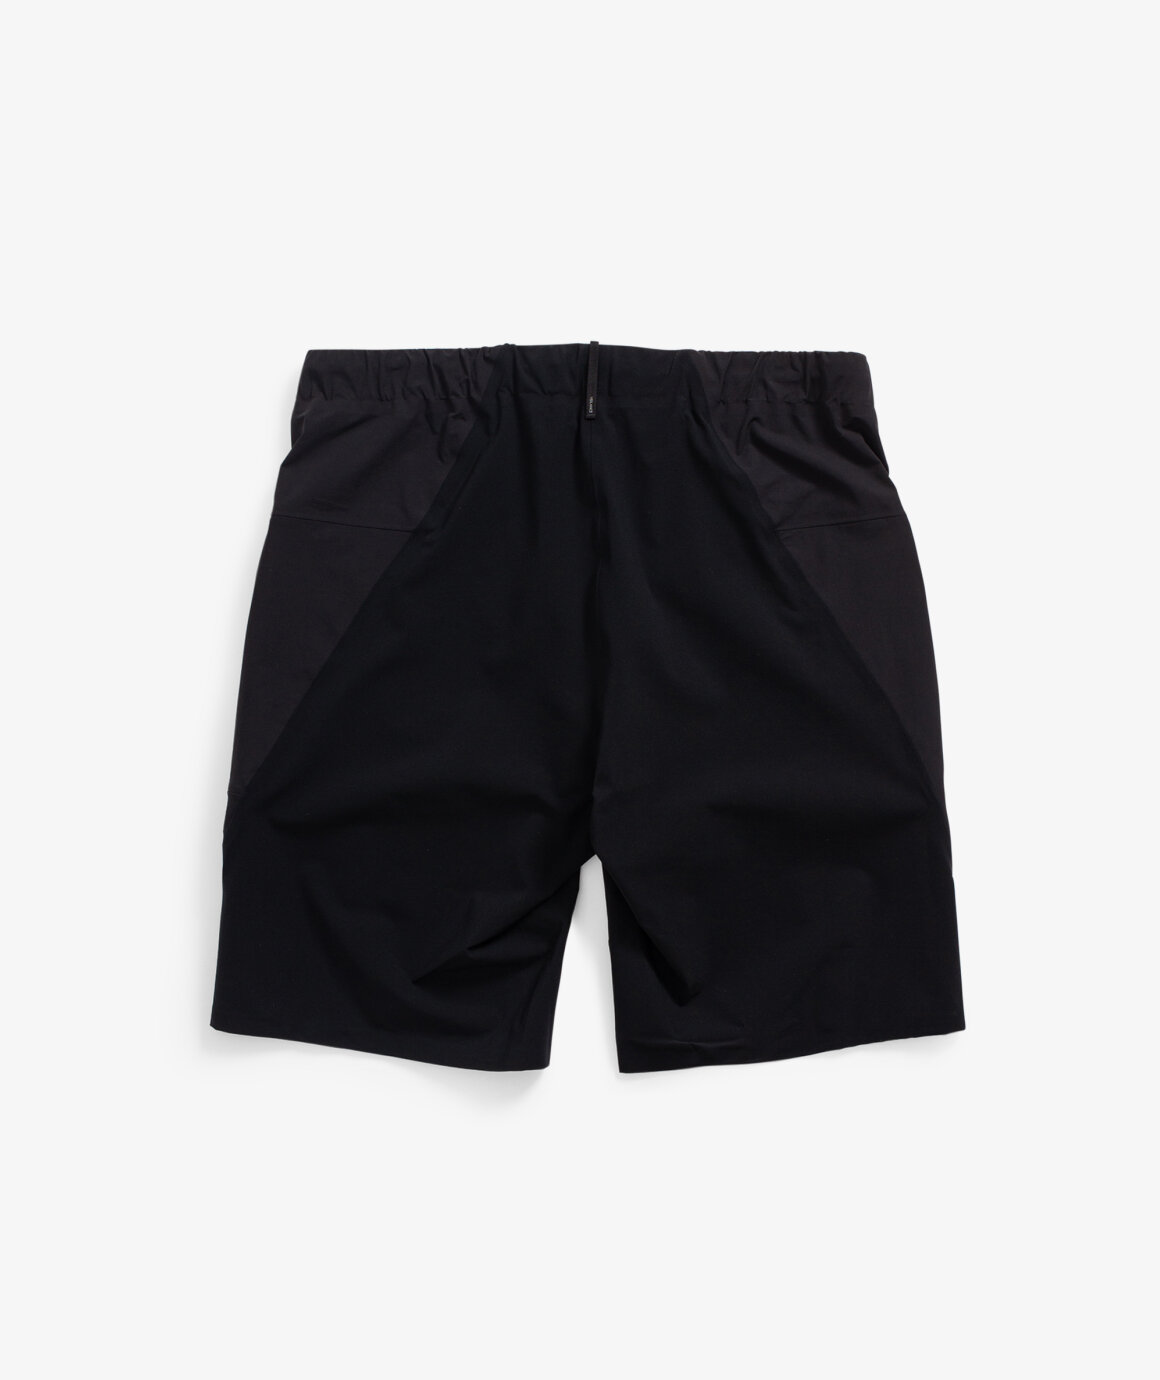 Norse Store | Shipping Worldwide - Veilance SECANT COMP SHORT M - Black